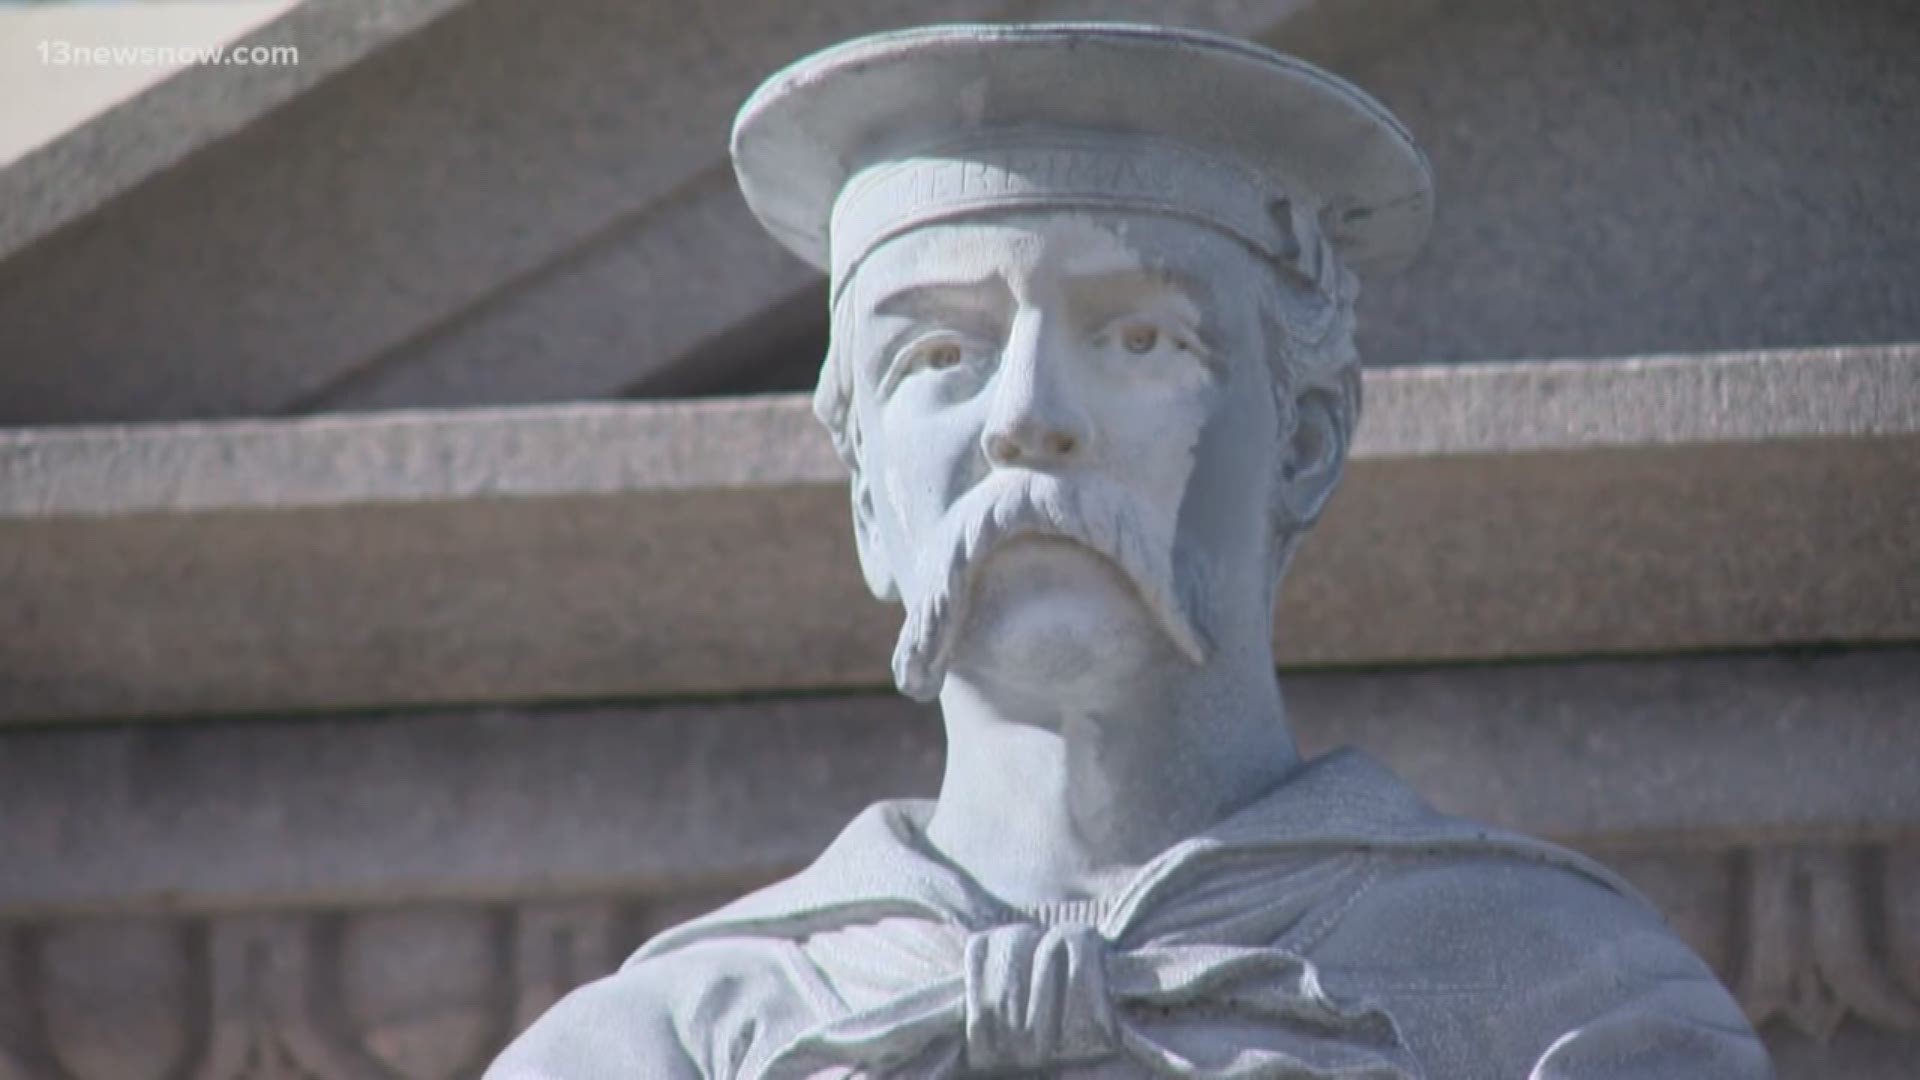 The fight over Confederate monuments in Virginia continues. Governor Northam proposed a change to the state's war memorial laws.